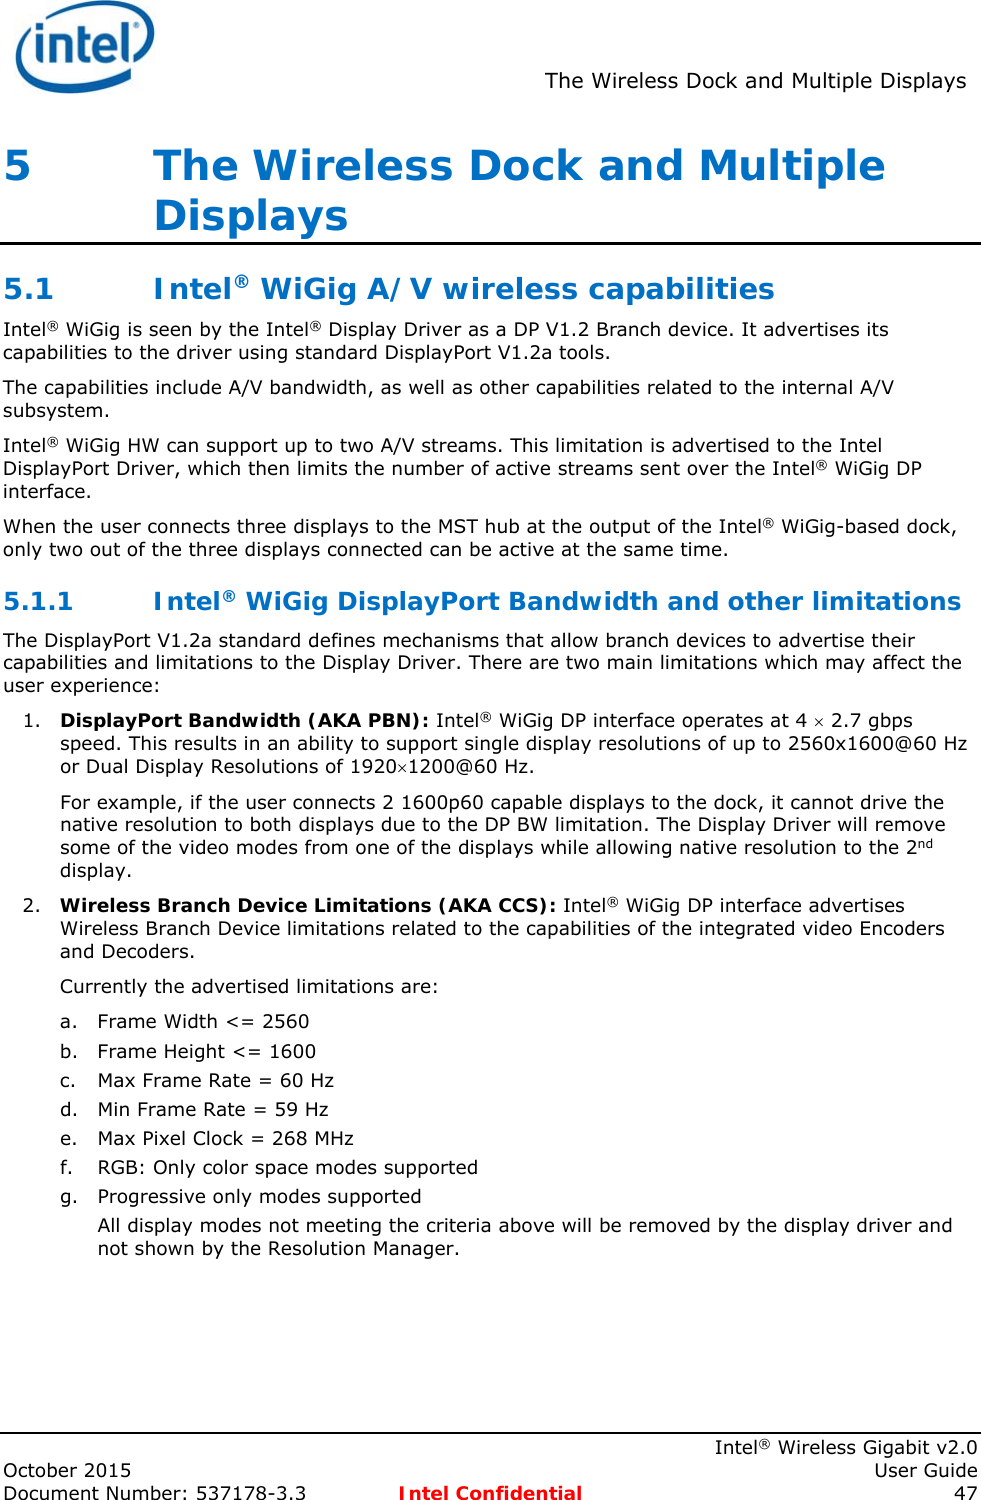  The Wireless Dock and Multiple Displays    Intel® Wireless Gigabit v2.0 October 2015    User Guide Document Number: 537178-3.3  Intel Confidential 47 5   The Wireless Dock and Multiple Displays 5.1 Intel® WiGig A/V wireless capabilities Intel® WiGig is seen by the Intel® Display Driver as a DP V1.2 Branch device. It advertises its capabilities to the driver using standard DisplayPort V1.2a tools. The capabilities include A/V bandwidth, as well as other capabilities related to the internal A/V subsystem. Intel® WiGig HW can support up to two A/V streams. This limitation is advertised to the Intel DisplayPort Driver, which then limits the number of active streams sent over the Intel® WiGig DP interface. When the user connects three displays to the MST hub at the output of the Intel® WiGig-based dock, only two out of the three displays connected can be active at the same time. 5.1.1 Intel® WiGig DisplayPort Bandwidth and other limitations  The DisplayPort V1.2a standard defines mechanisms that allow branch devices to advertise their capabilities and limitations to the Display Driver. There are two main limitations which may affect the user experience: 1. DisplayPort Bandwidth (AKA PBN): Intel® WiGig DP interface operates at 4  2.7 gbps speed. This results in an ability to support single display resolutions of up to 2560x1600@60 Hz or Dual Display Resolutions of 19201200@60 Hz. For example, if the user connects 2 1600p60 capable displays to the dock, it cannot drive the native resolution to both displays due to the DP BW limitation. The Display Driver will remove some of the video modes from one of the displays while allowing native resolution to the 2nd display. 2. Wireless Branch Device Limitations (AKA CCS): Intel® WiGig DP interface advertises Wireless Branch Device limitations related to the capabilities of the integrated video Encoders and Decoders.  Currently the advertised limitations are: a. Frame Width &lt;= 2560 b. Frame Height &lt;= 1600 c. Max Frame Rate = 60 Hz d. Min Frame Rate = 59 Hz e. Max Pixel Clock = 268 MHz f. RGB: Only color space modes supported g. Progressive only modes supported All display modes not meeting the criteria above will be removed by the display driver and not shown by the Resolution Manager. 